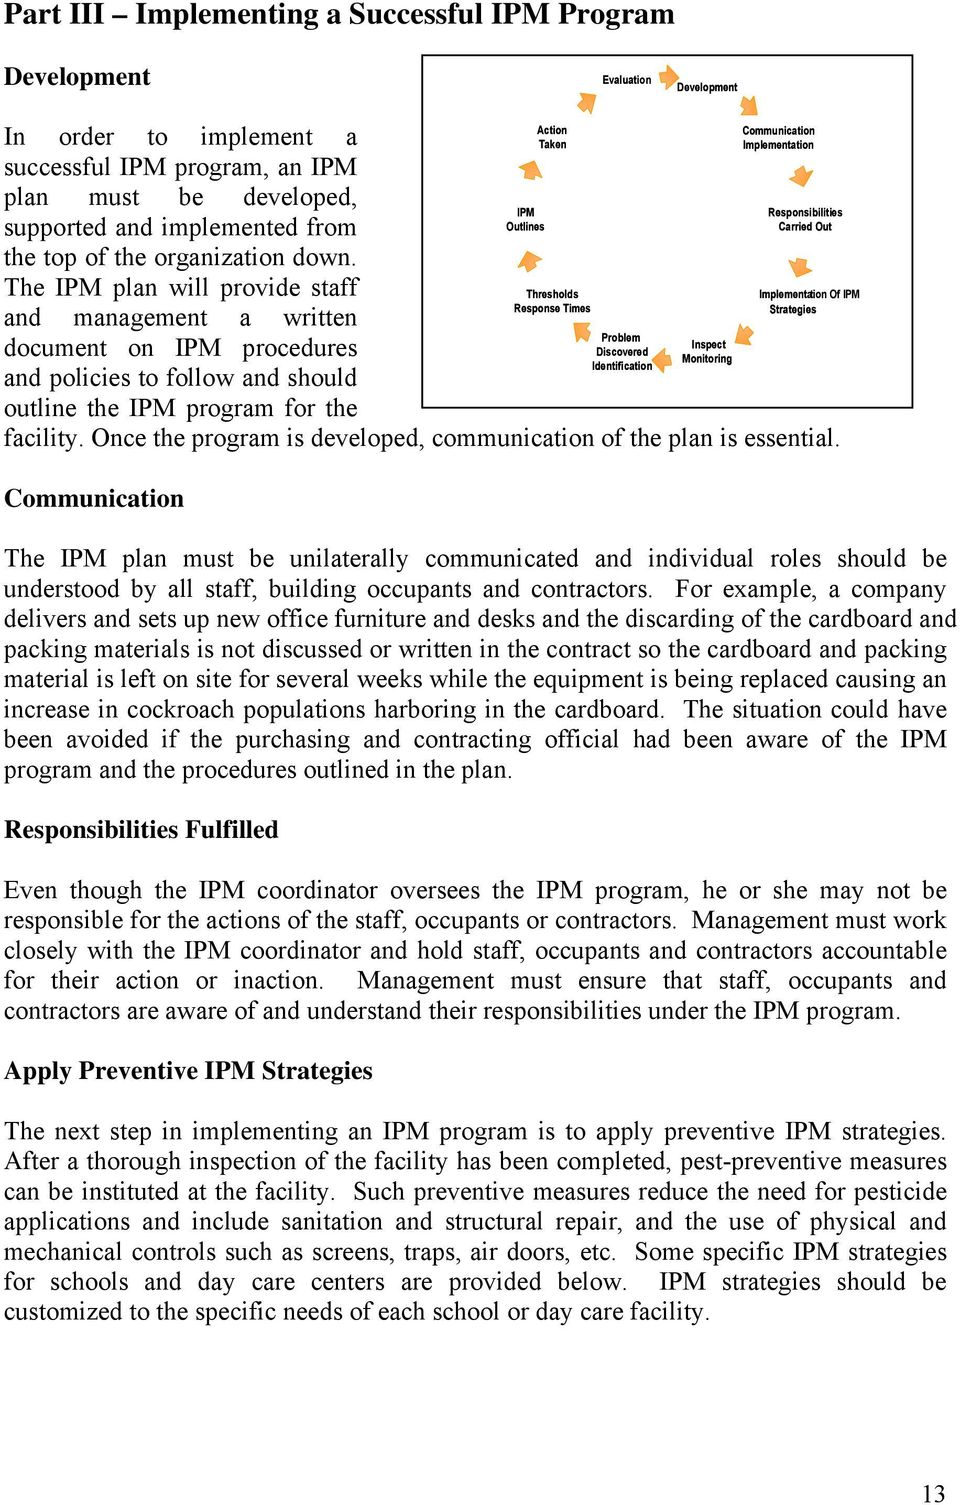 The IPM plan will provide staff Thresholds Implementa Response Times Strategies and management a written Problem Inspect document on IPM procedures Discovered Monitoring Identification and policies